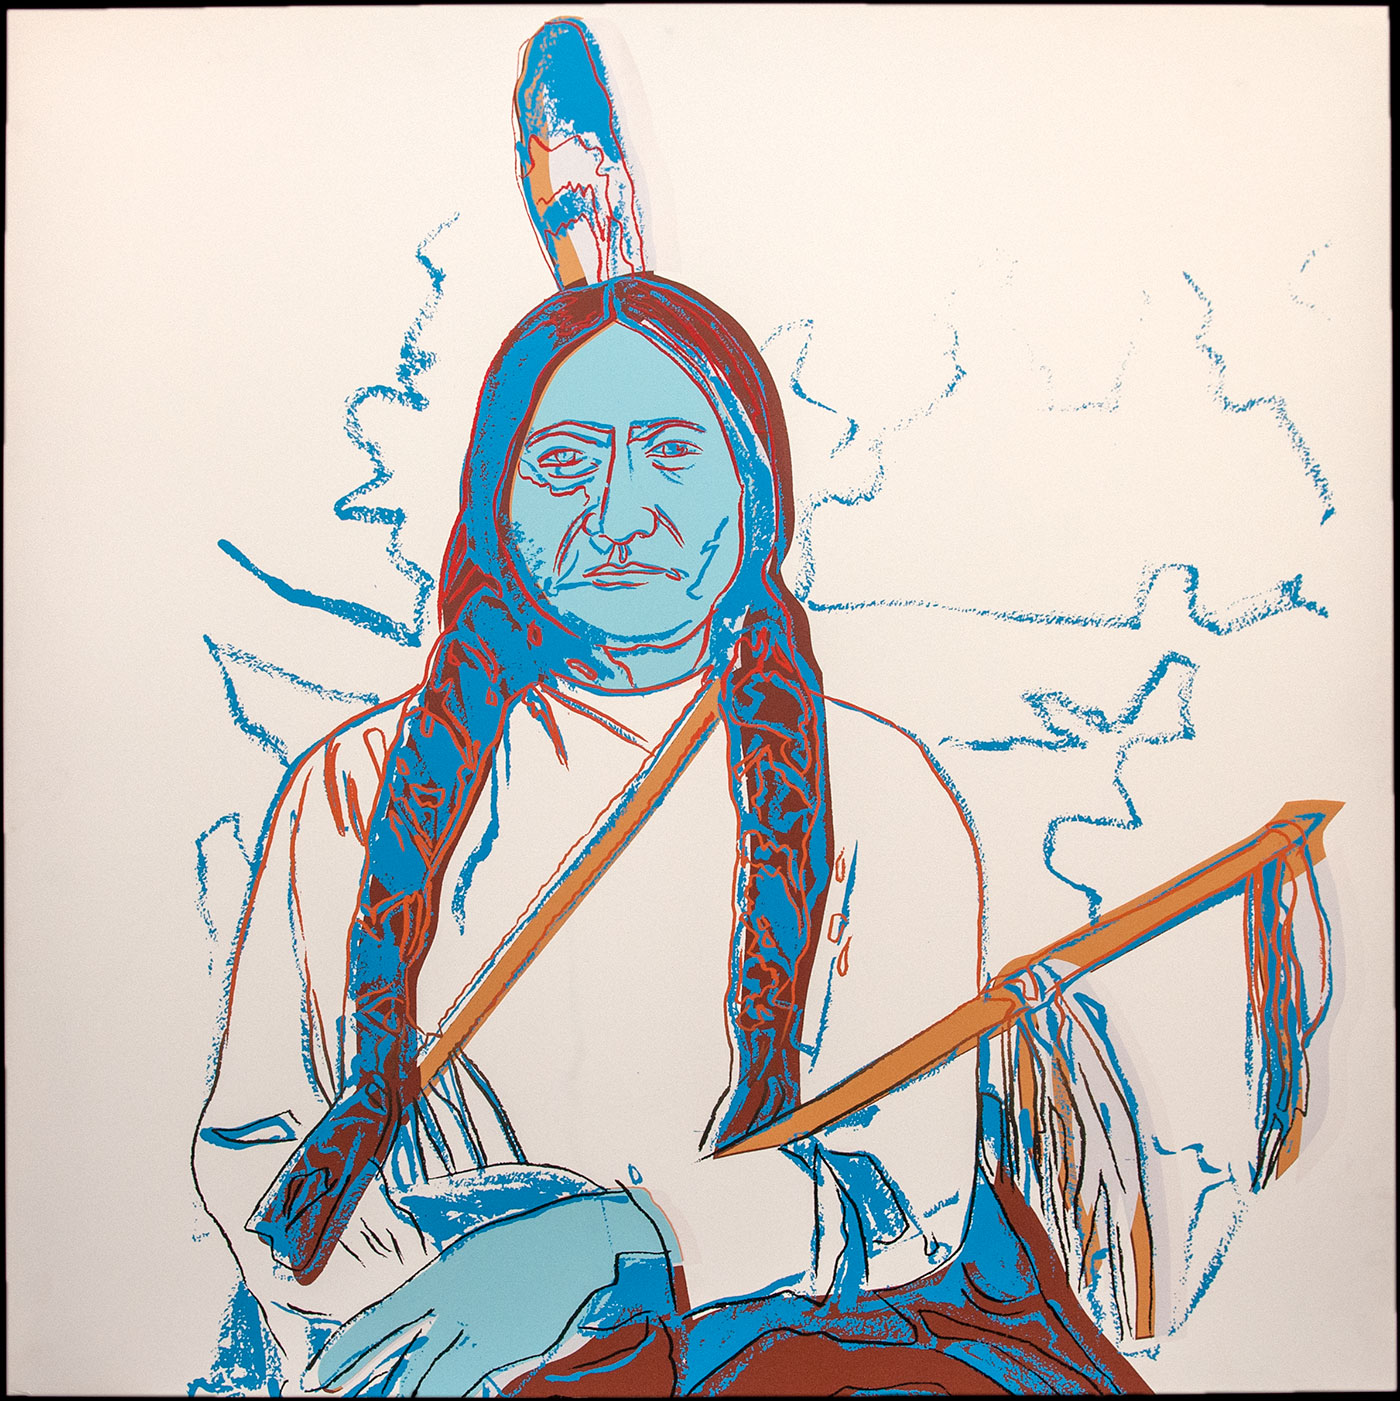 Seated half-length portrait of Sitting Bull printed in blue, burnt-orange/red, and yellow gold. Subject has two long braids and upright feather in hair with arms crossed across his lap cradling a slender staff with feathers tied to it in the crook of his proper left arm. Sitting Bull appears on an almost completely white background except for blue lines vaguely suggesting foliage.